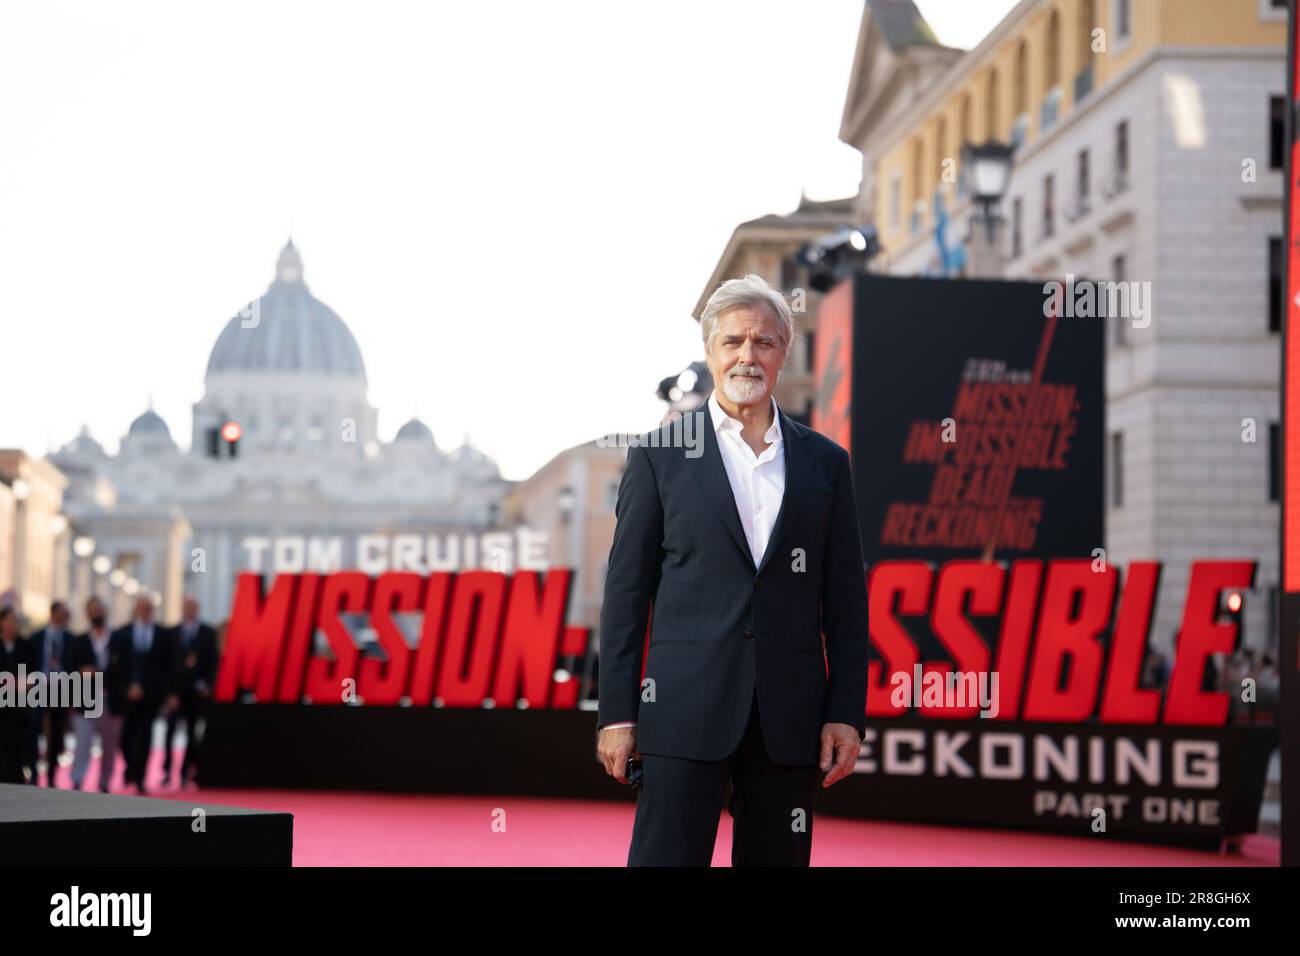 https://c8.alamy.com/comp/2R8GH6X/canadian-actor-henry-czerny-puts-on-sunglasses-as-he-poses-on-the-spanish-steps-ahead-of-the-premiere-of-mission-impossible-dead-reckoning-part-one-movie-in-rome-on-june-19-2023-photo-by-luca-carlinonurphoto0-2R8GH6X.jpg